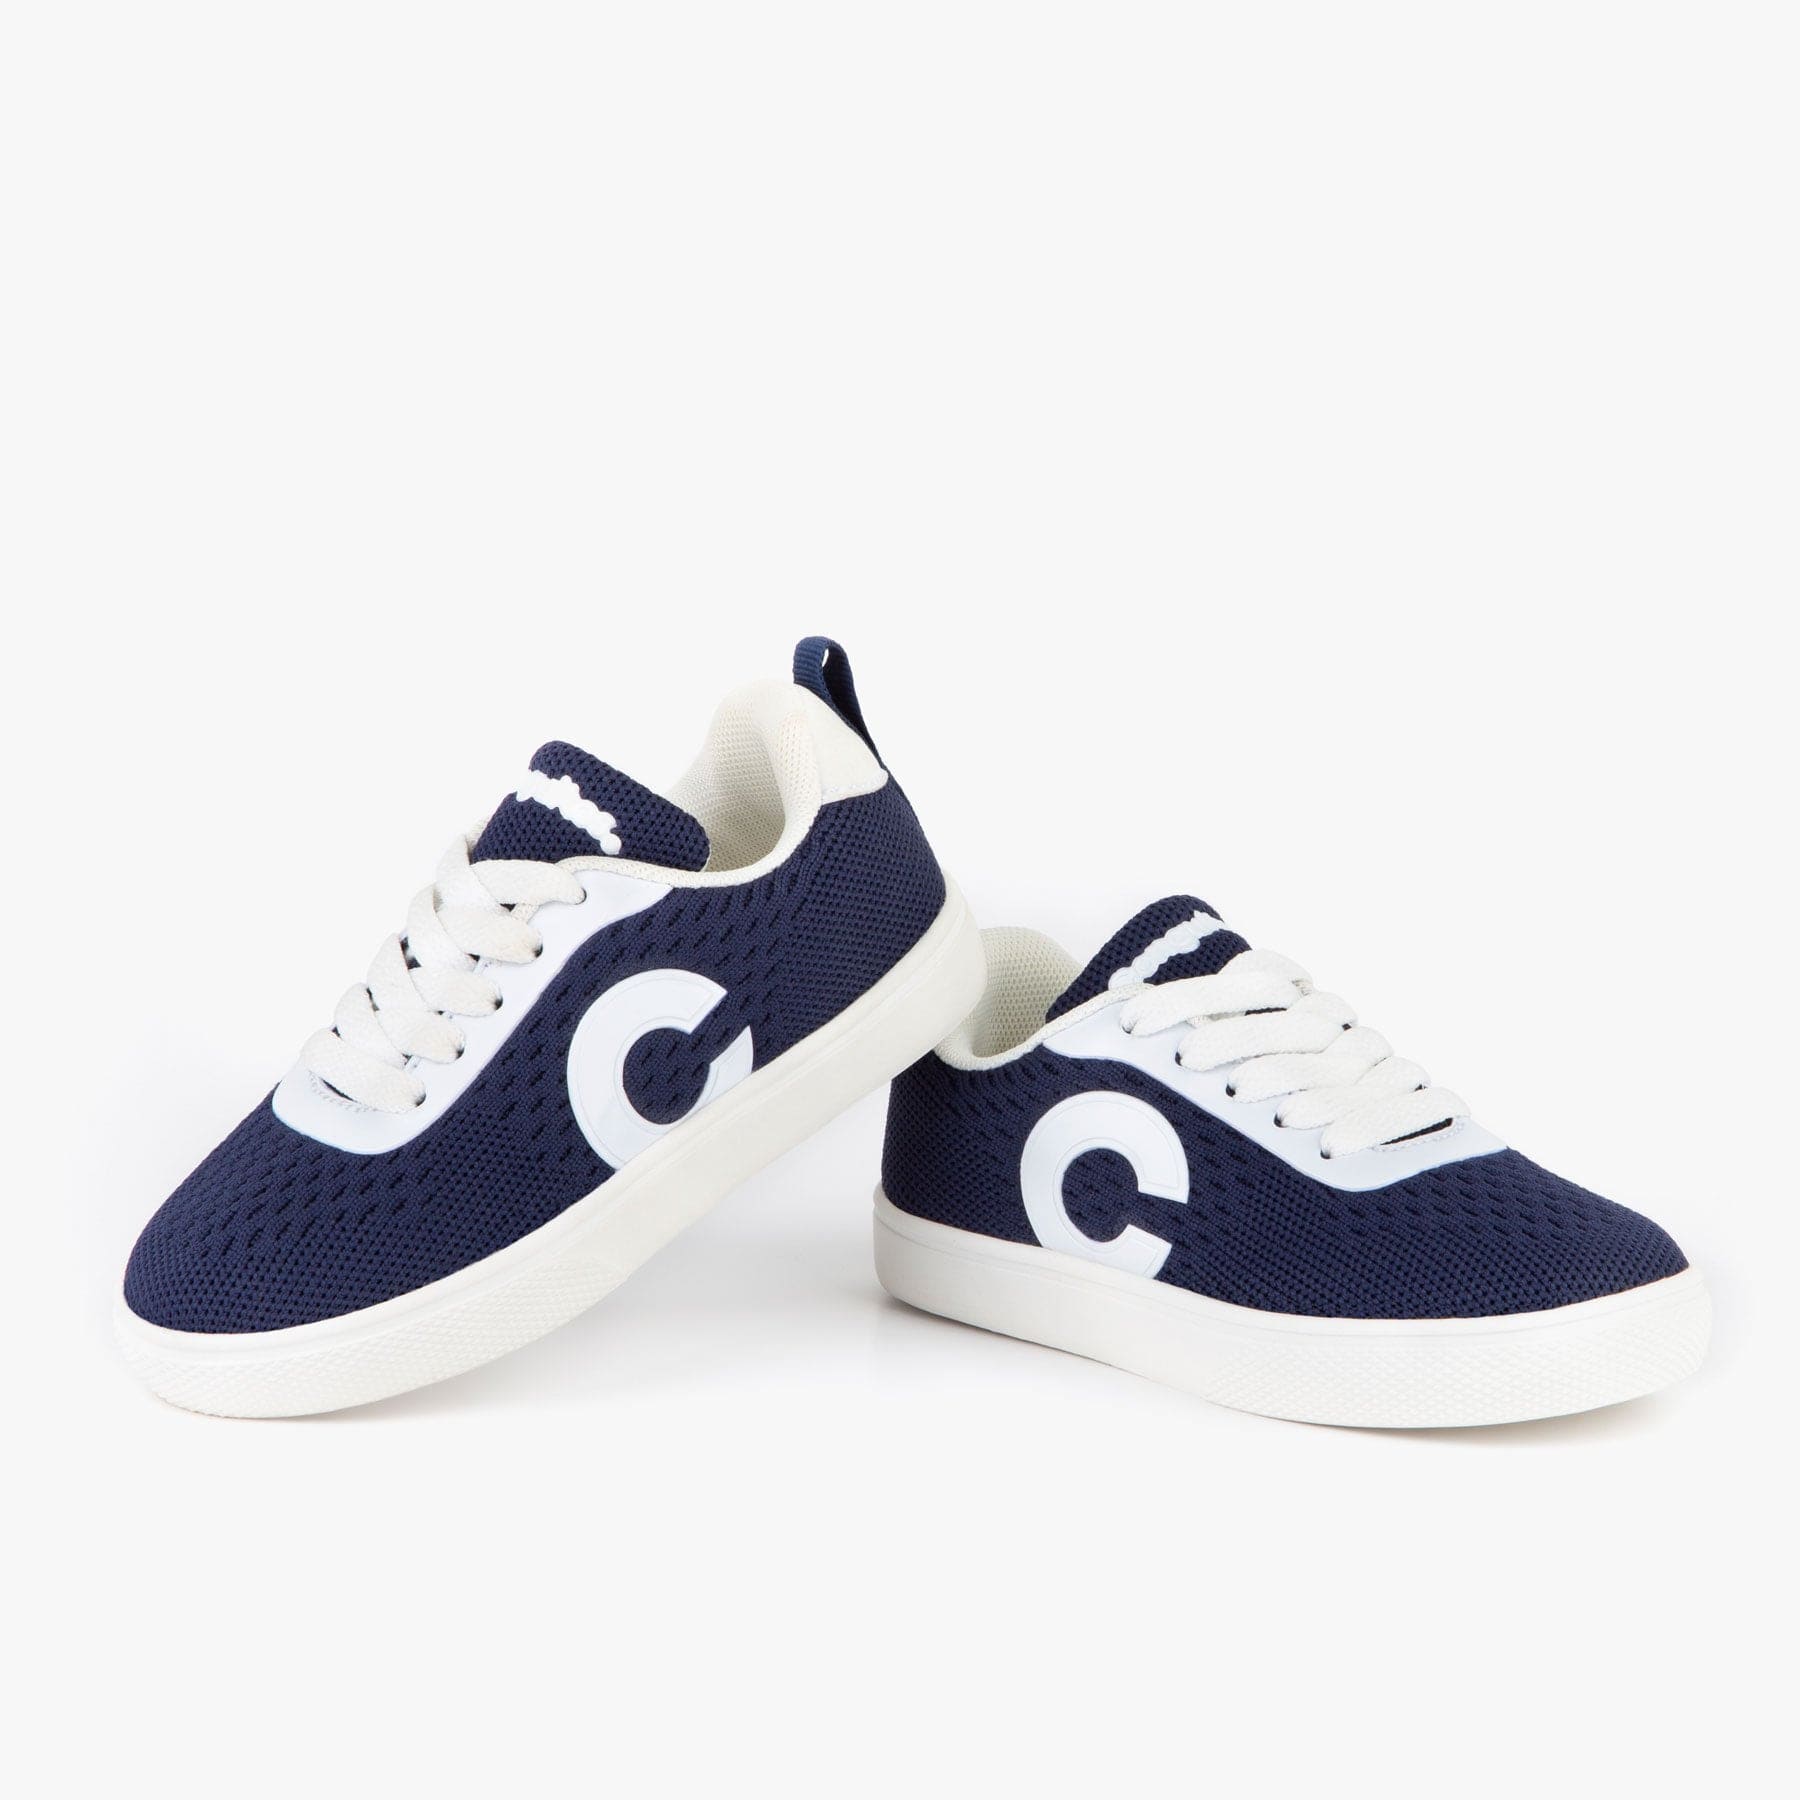 CONGUITOS Shoes Boy's Navy Mesh Sneakers